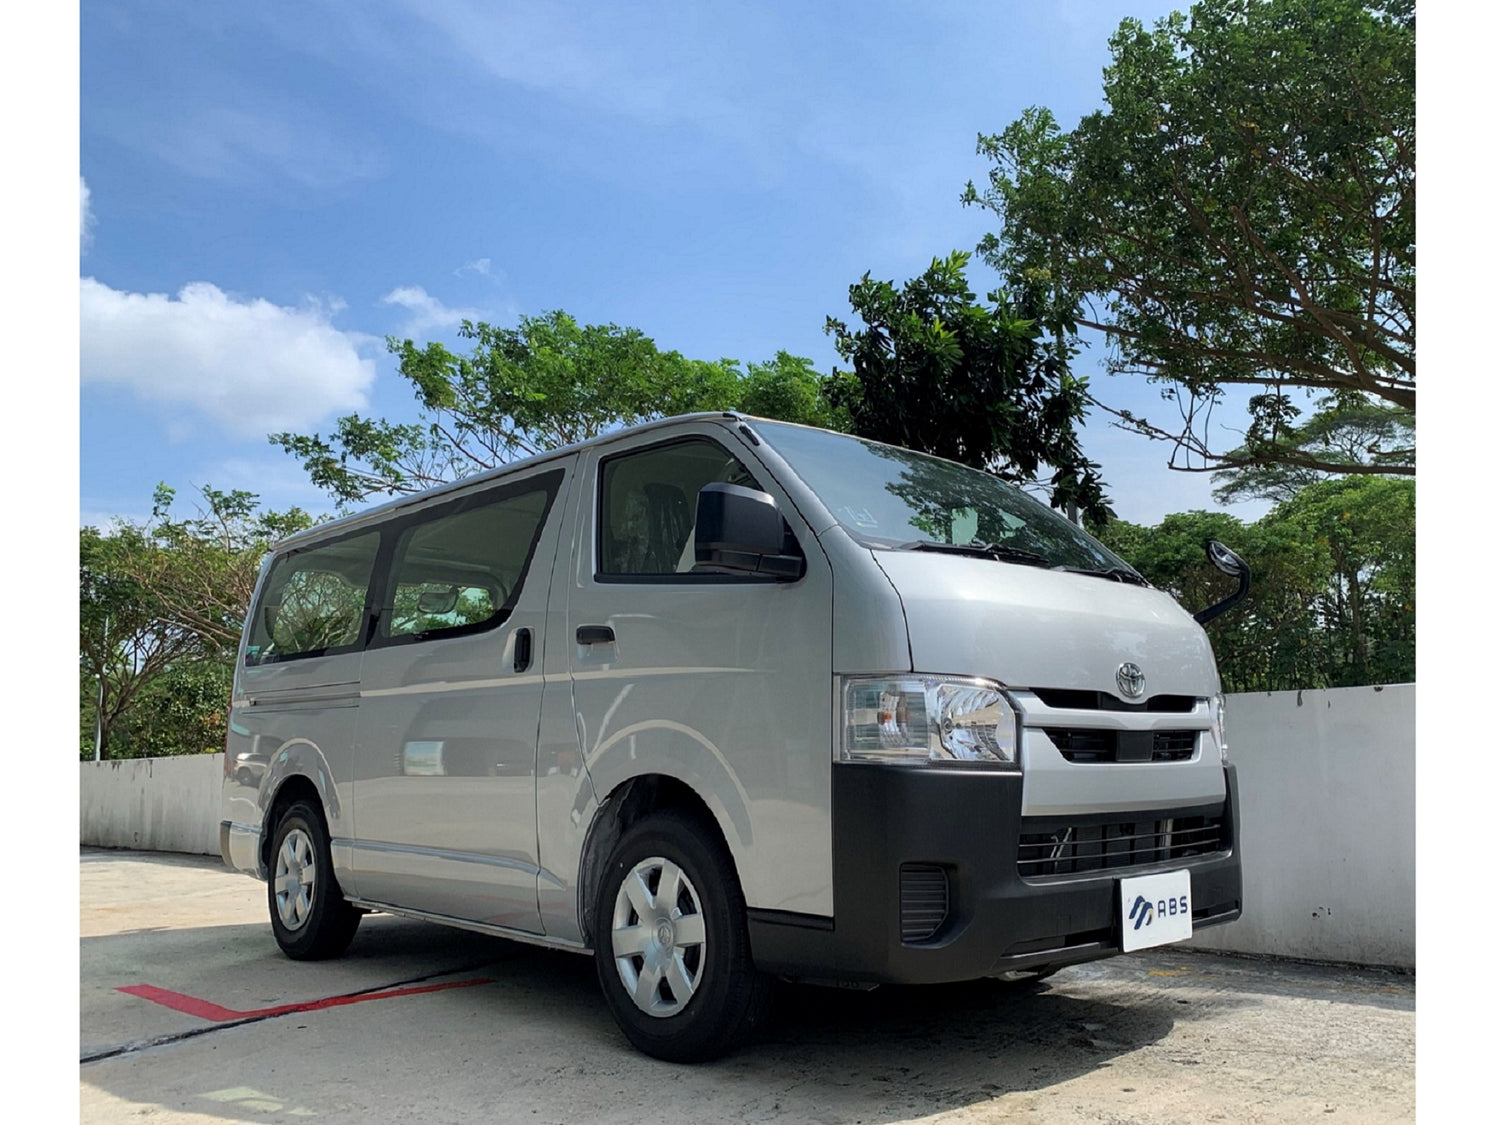 Toyota Hiace 2.8L Auto Diesel Engine With Rear Aircon | Without Rear Aircon